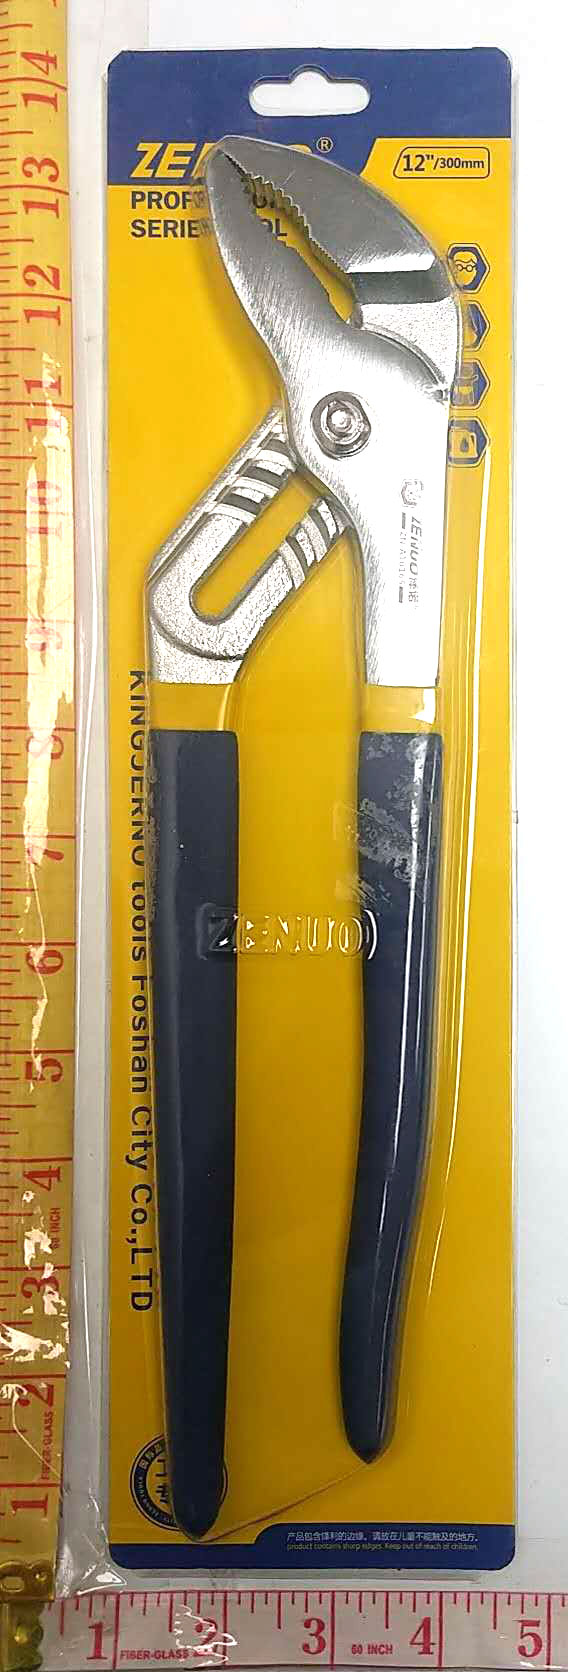 HEAVY DUTY STRONG GRIP PLIERS ZENUO PROFESSIONAL SERIES TOOL 12"/300MM $8